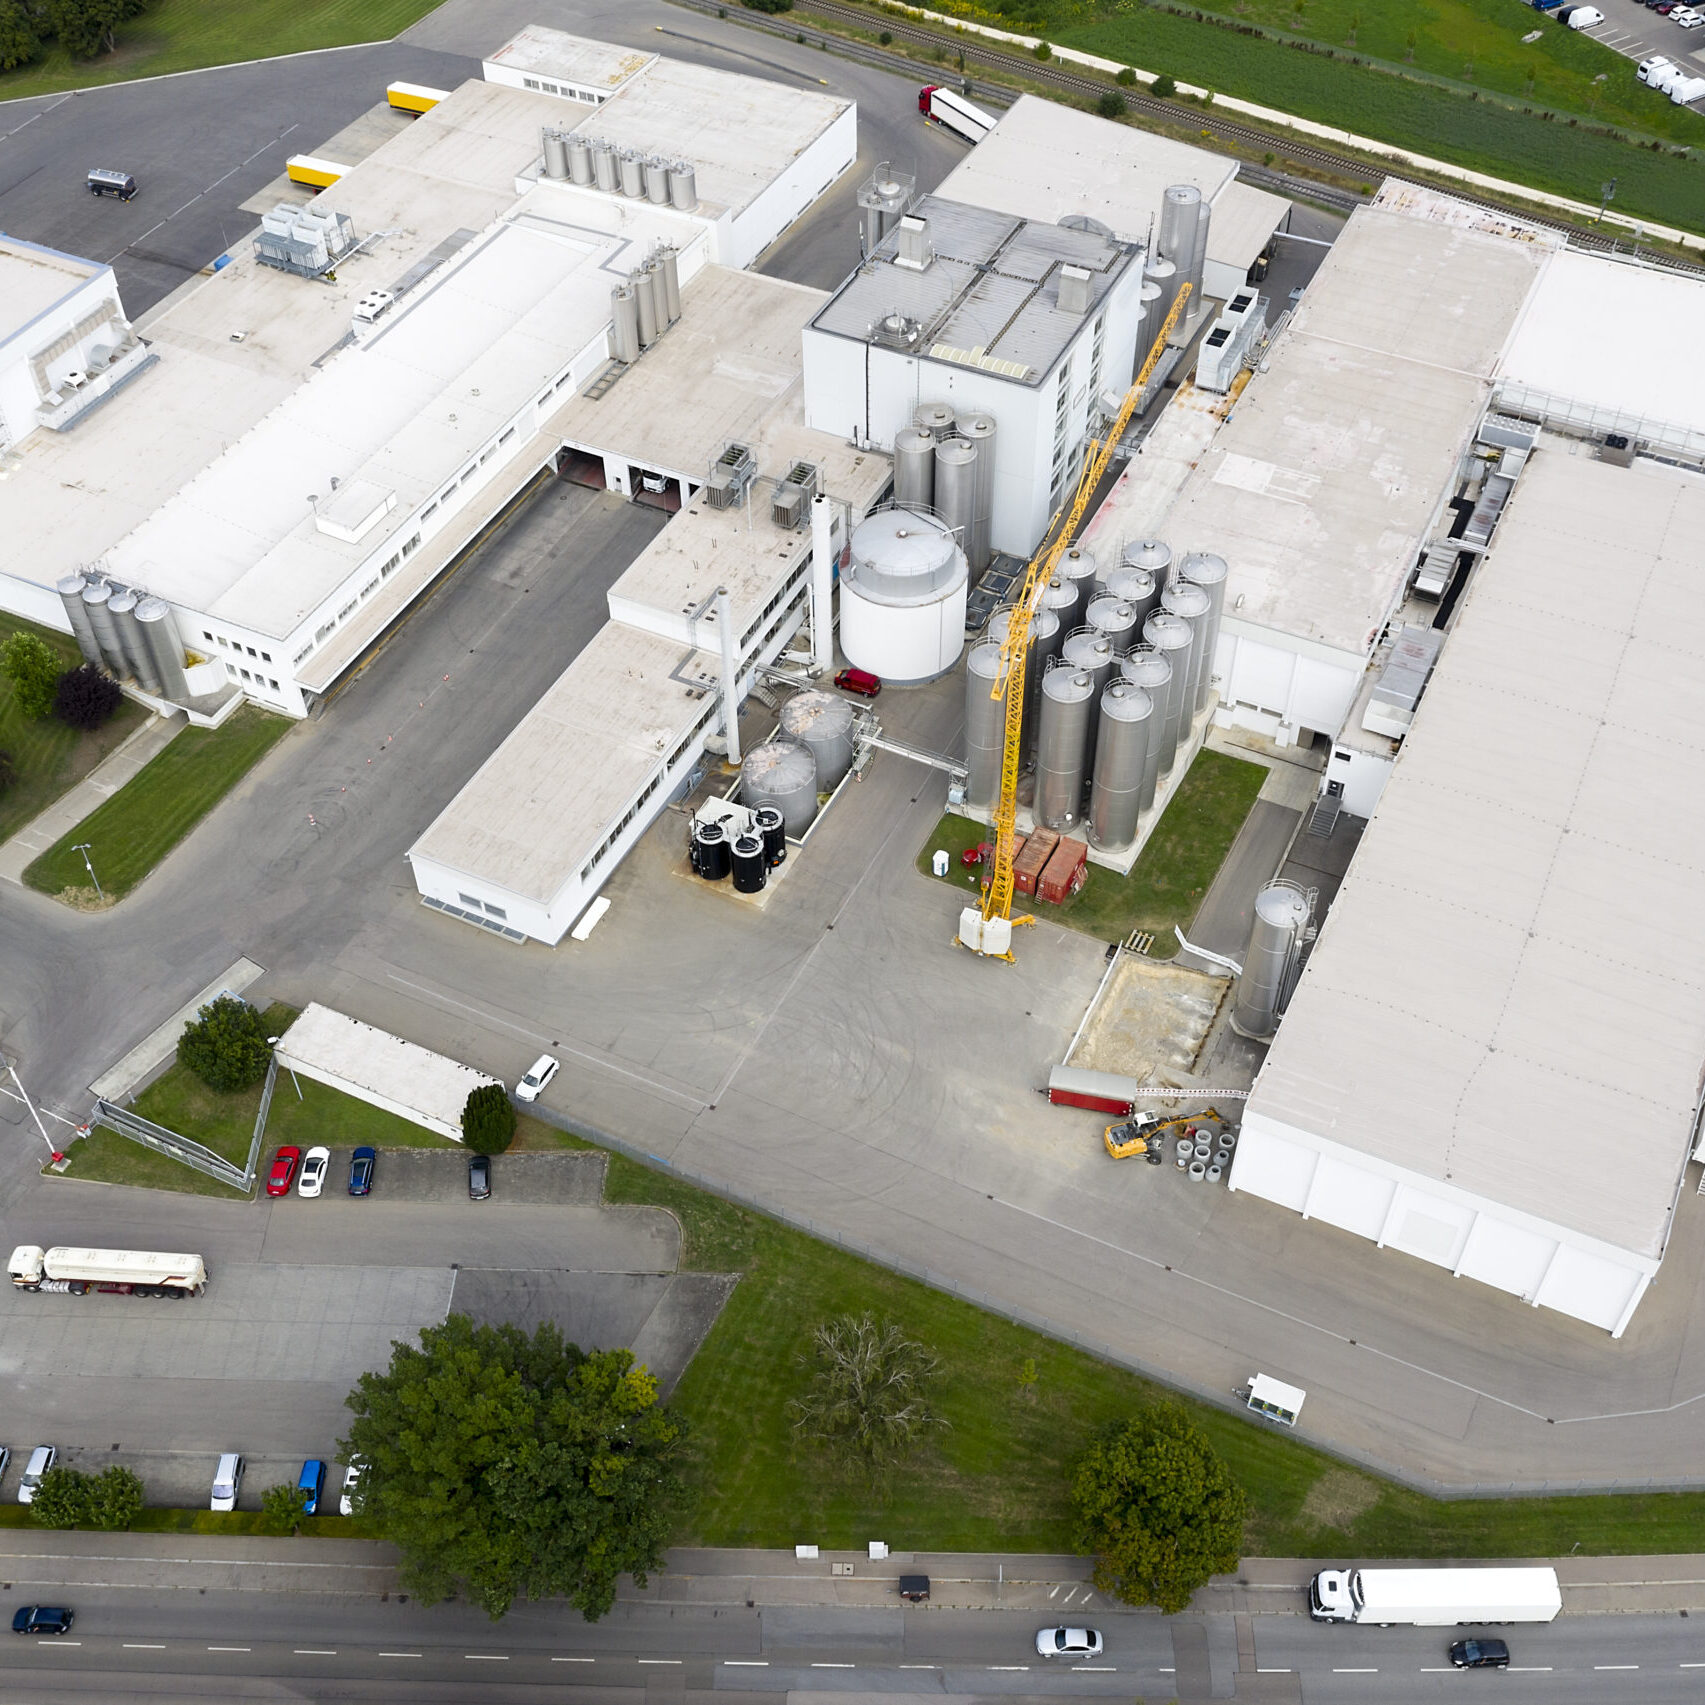 Aerial view of a stainless steel silos at dairy factory.